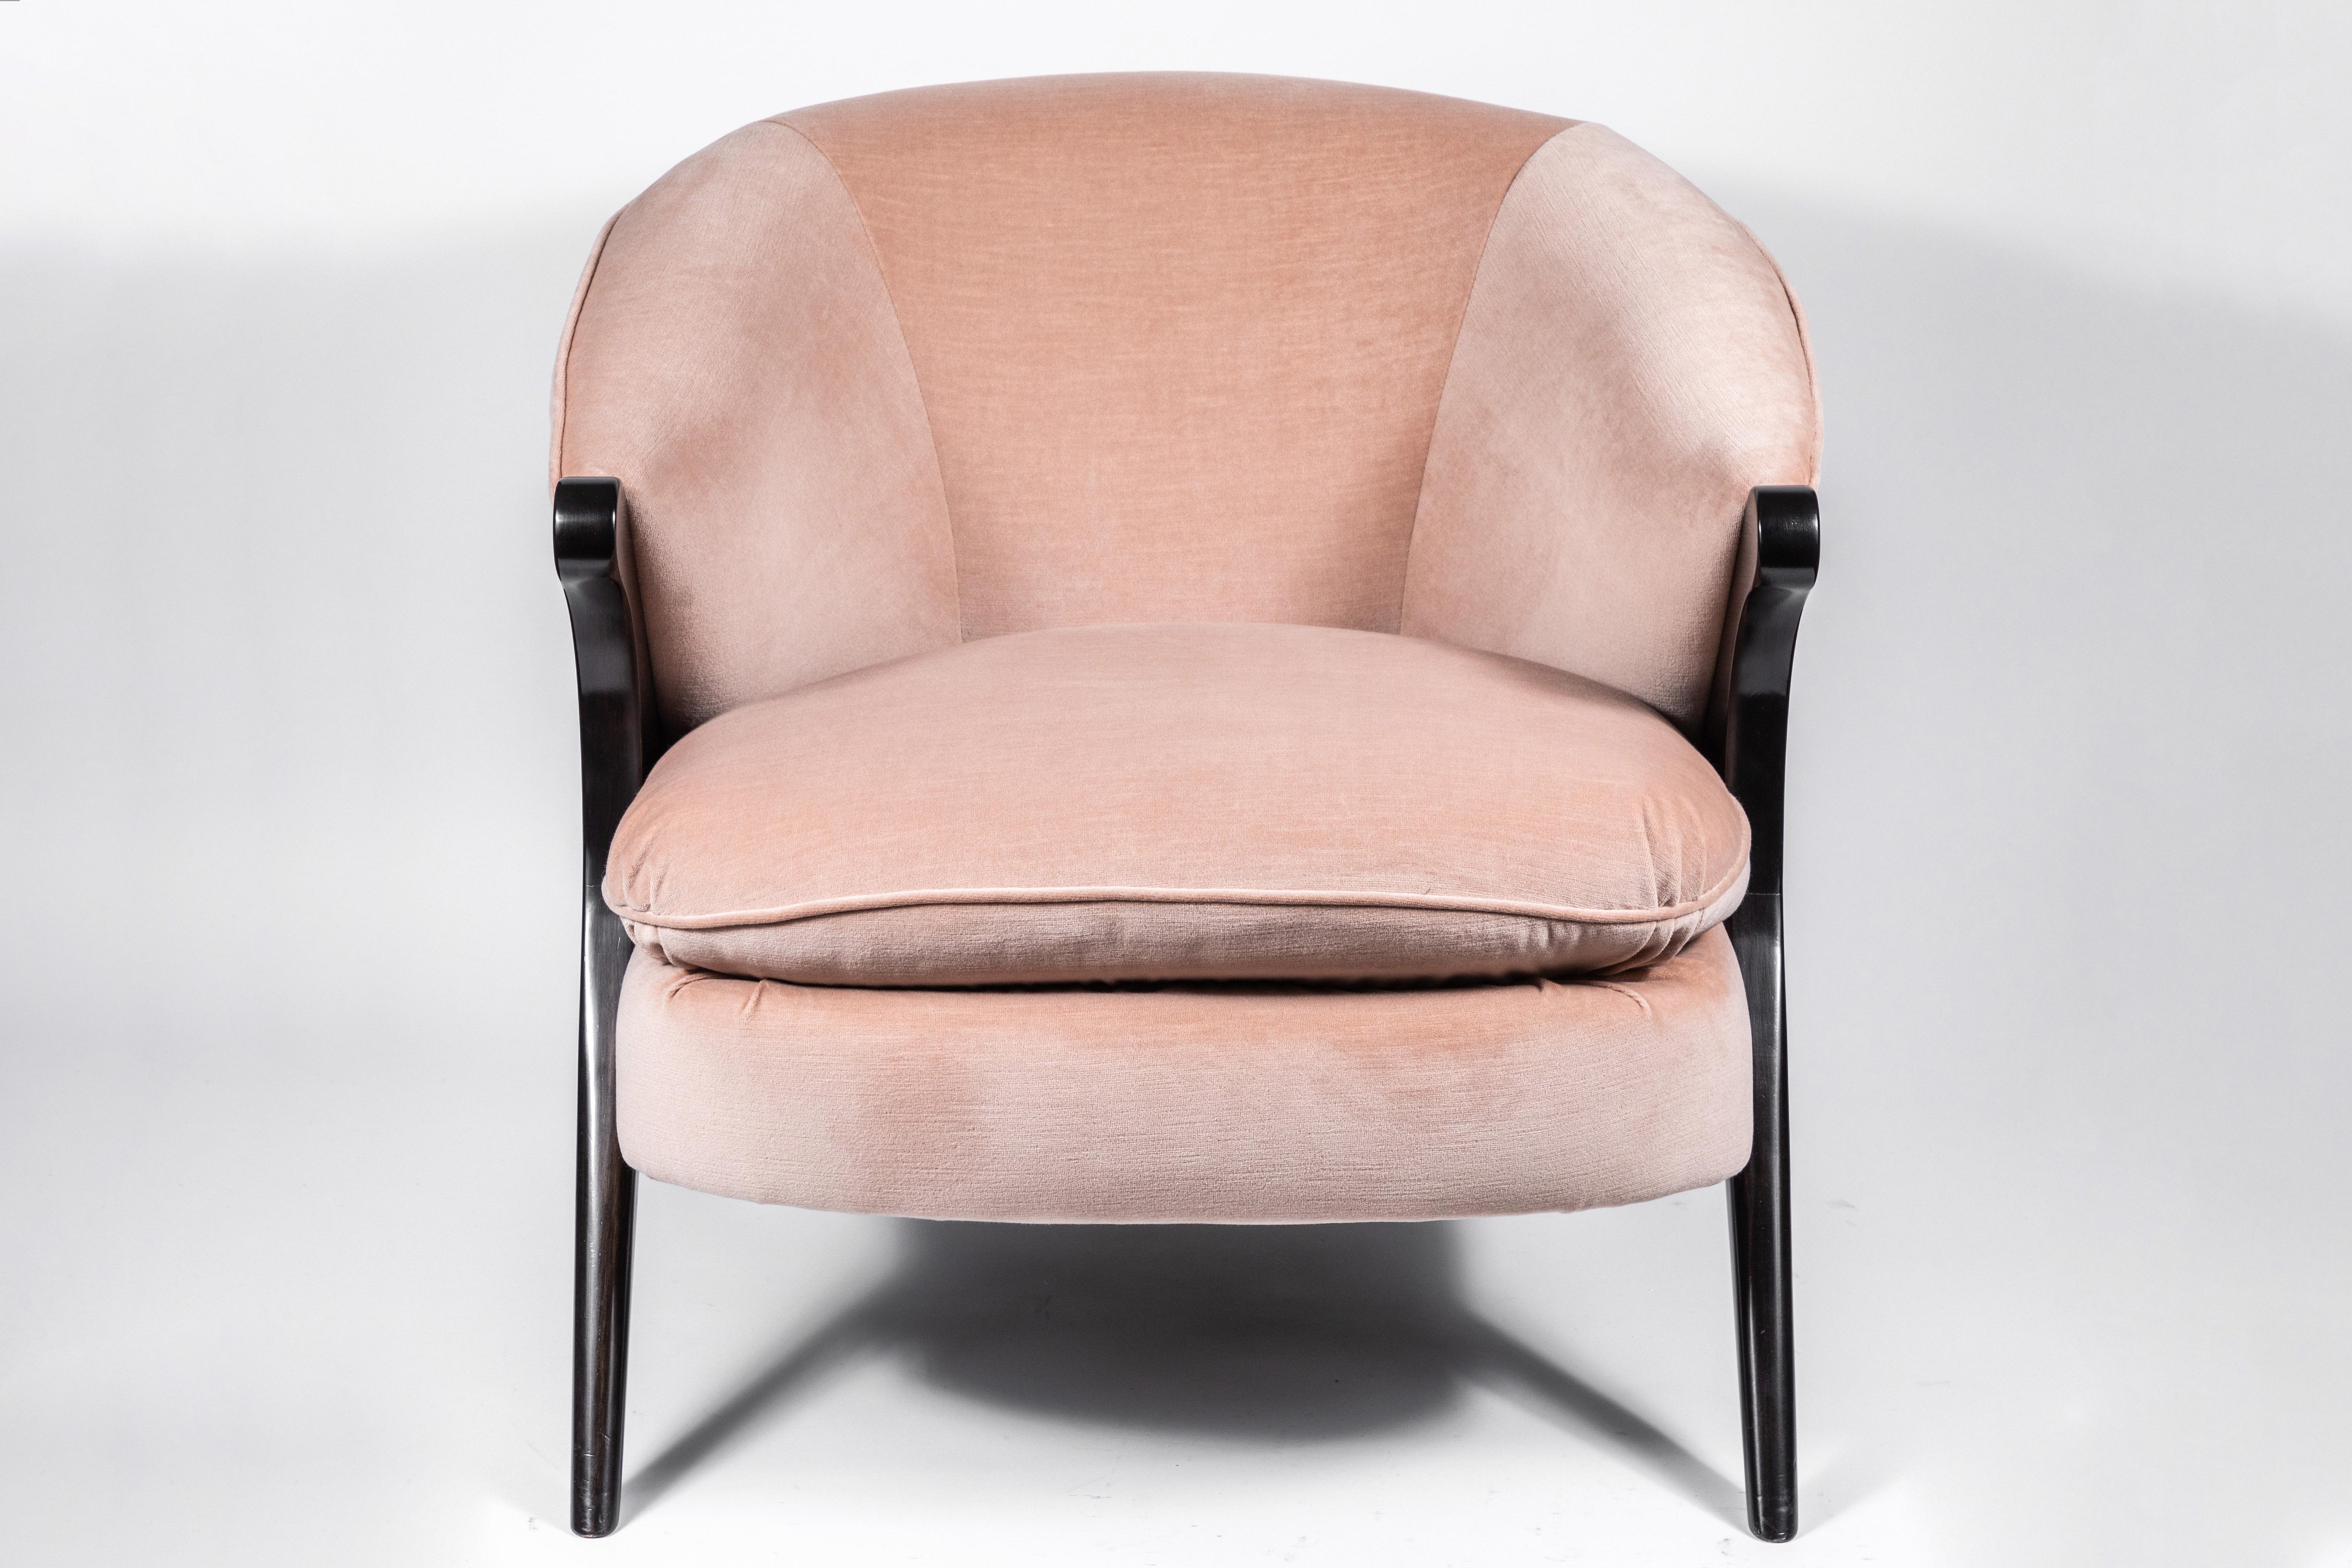 Fabulous pair of sculptural chairs with curved backs, scissor legs and arms in the style of Karpen, circa 1970s. Chairs are mint restored, with refinished walnut legs and newly upholstered in a blush pink velvet.